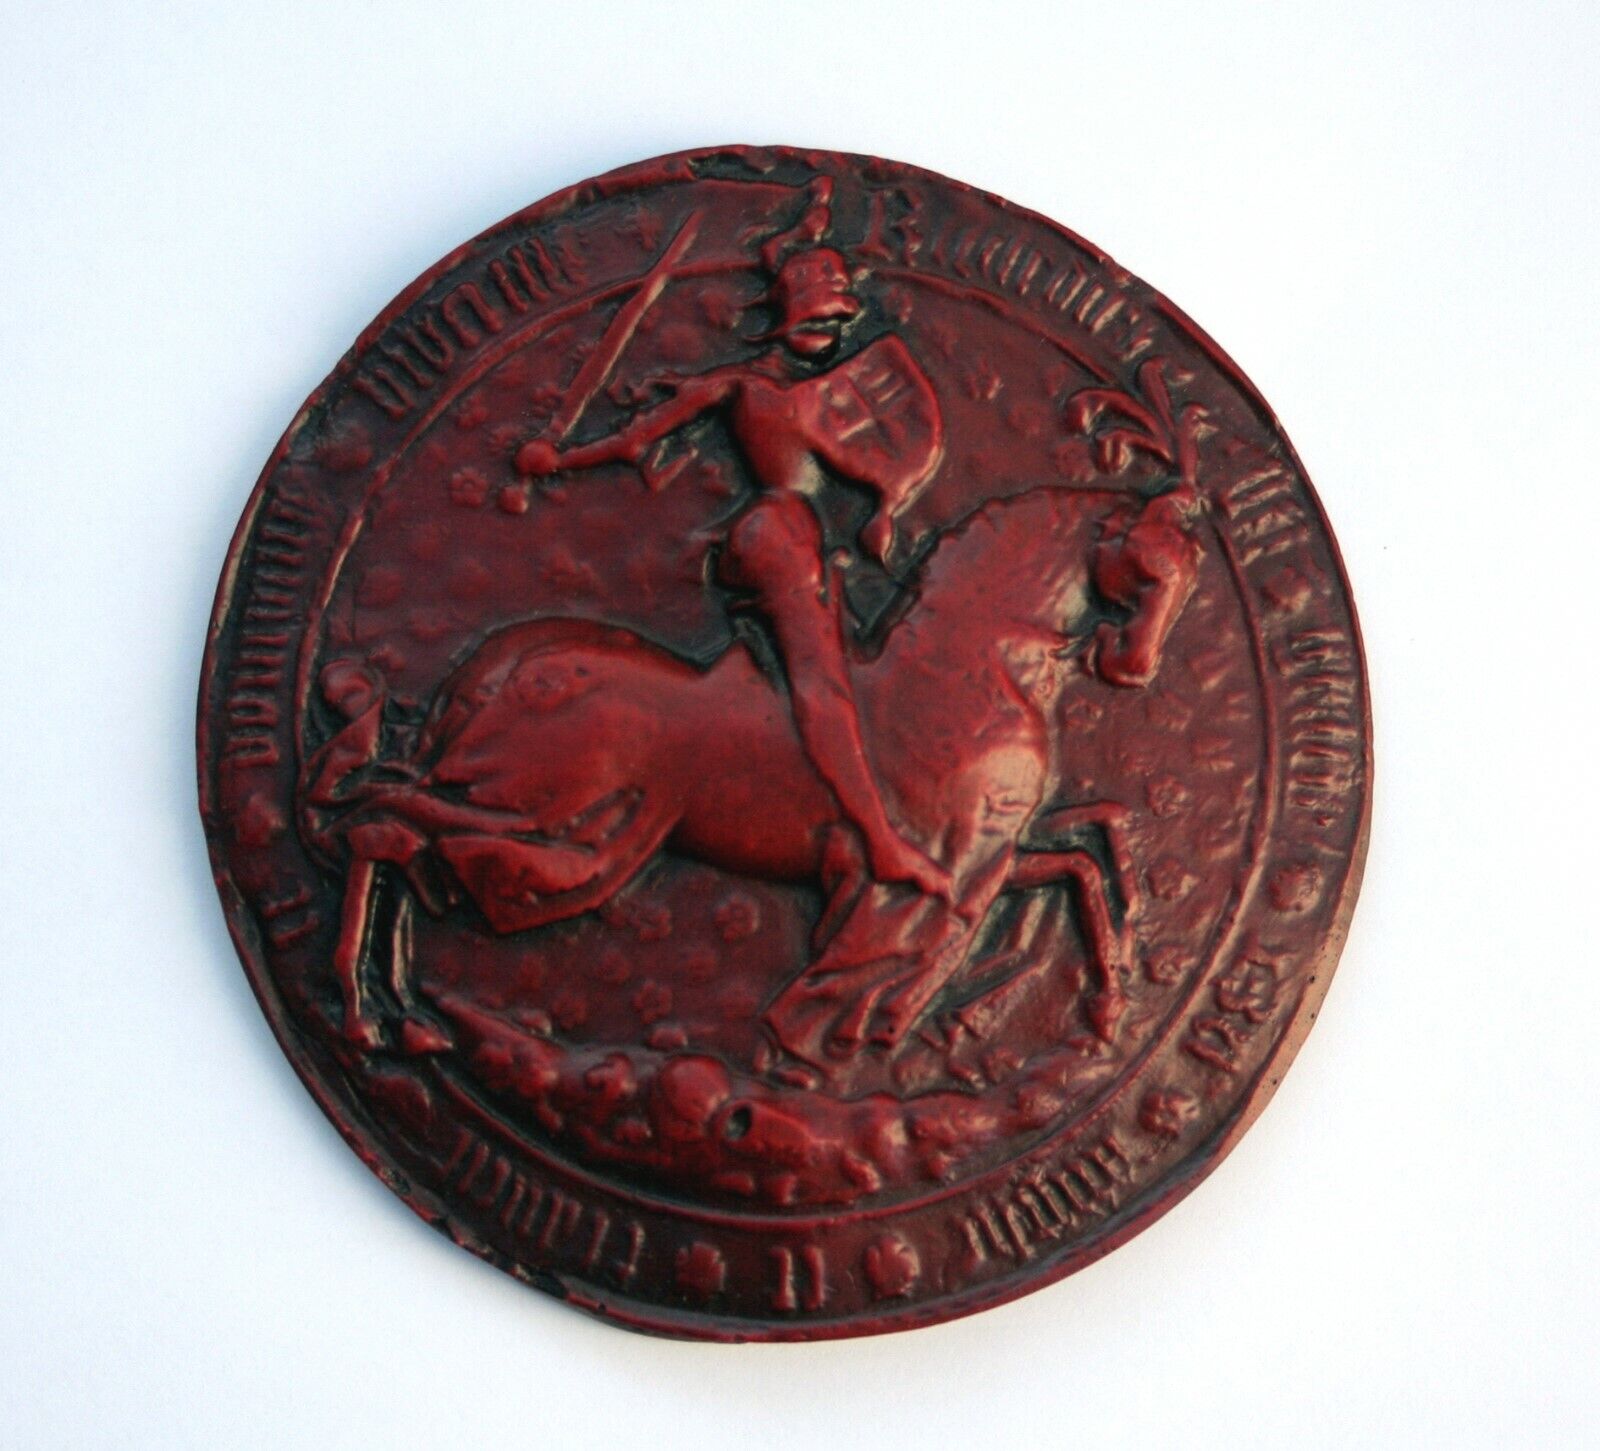 King Richard III Wax Great Seal Medieval Reproduction Collectable Giftware.